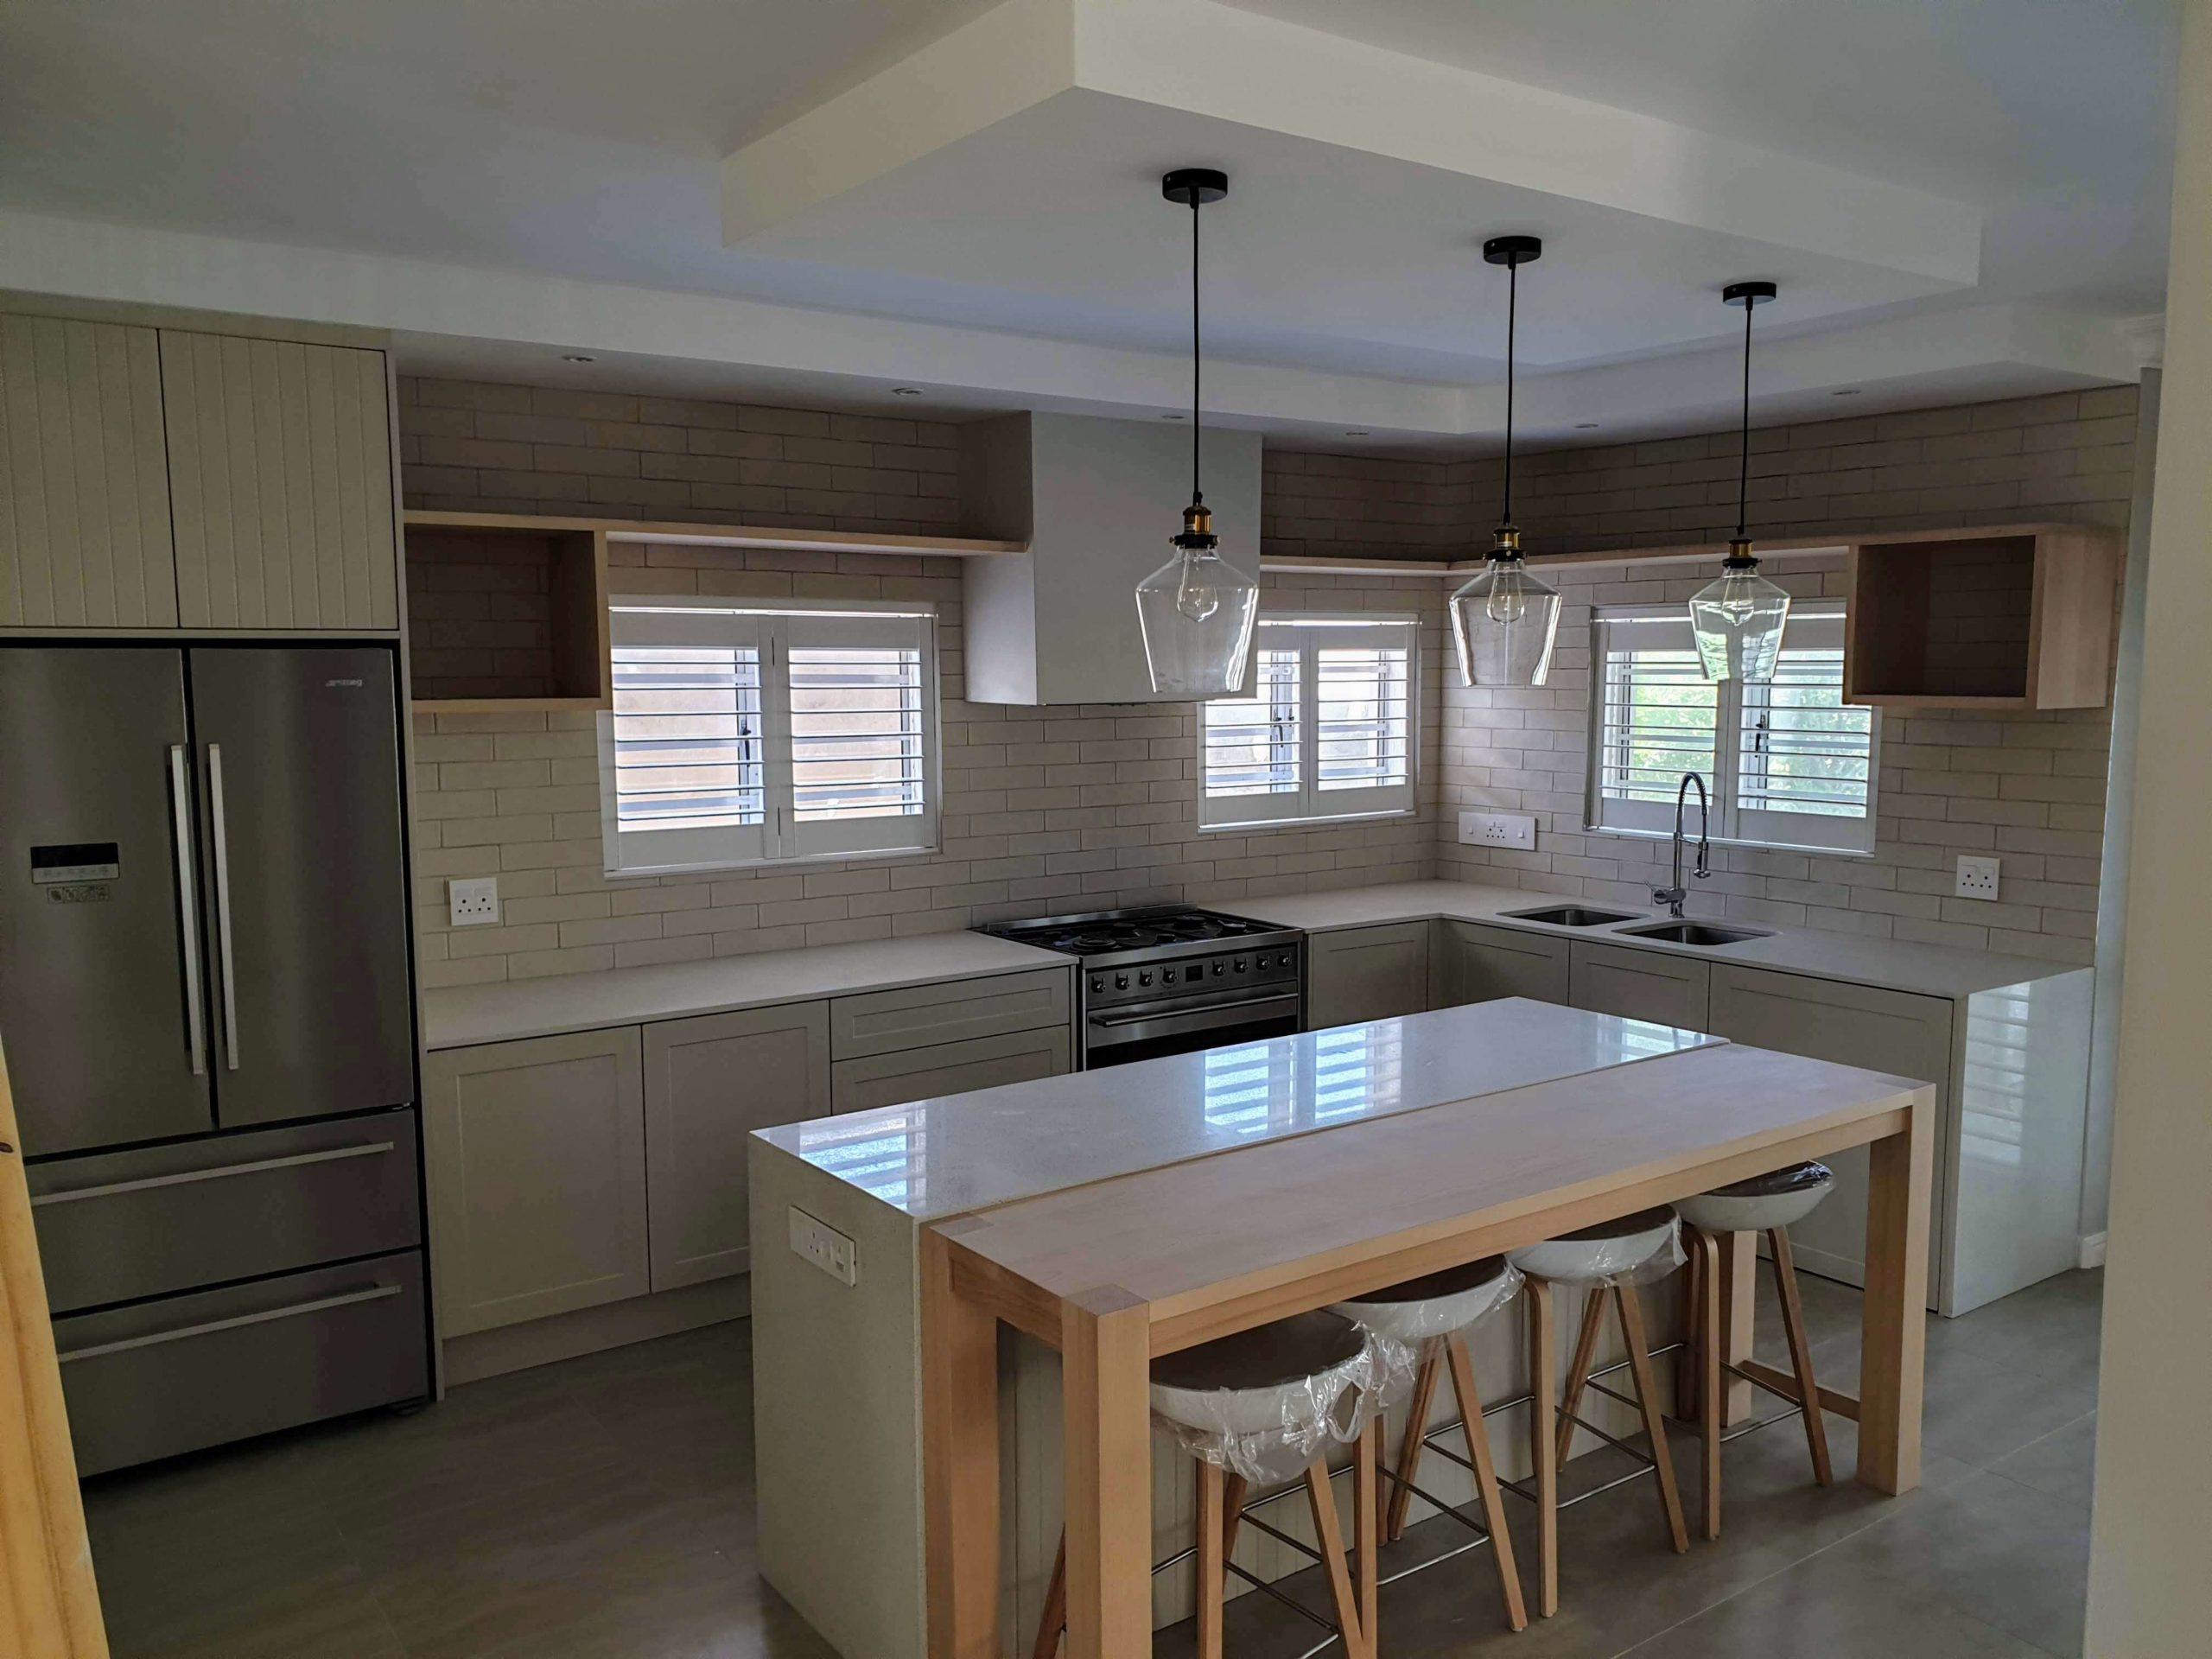 Bespoke Designs - 20190117 111427 scaled - kitchen renovation,cabinetry,custom cabinetry,built in cupboard